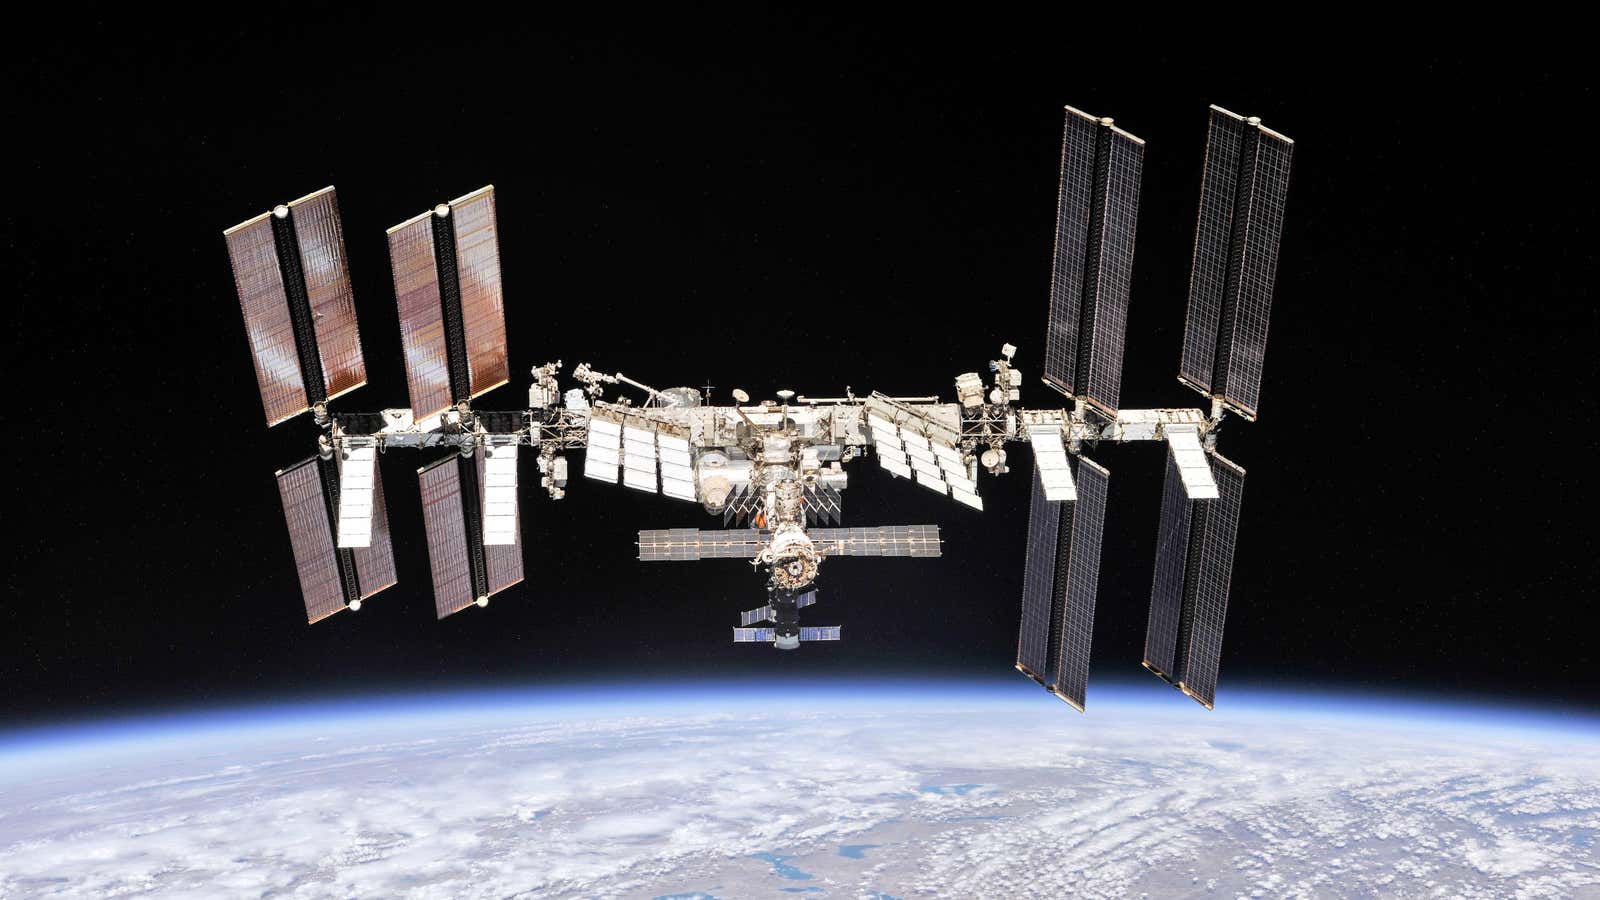 The International Space Station in all its glory.